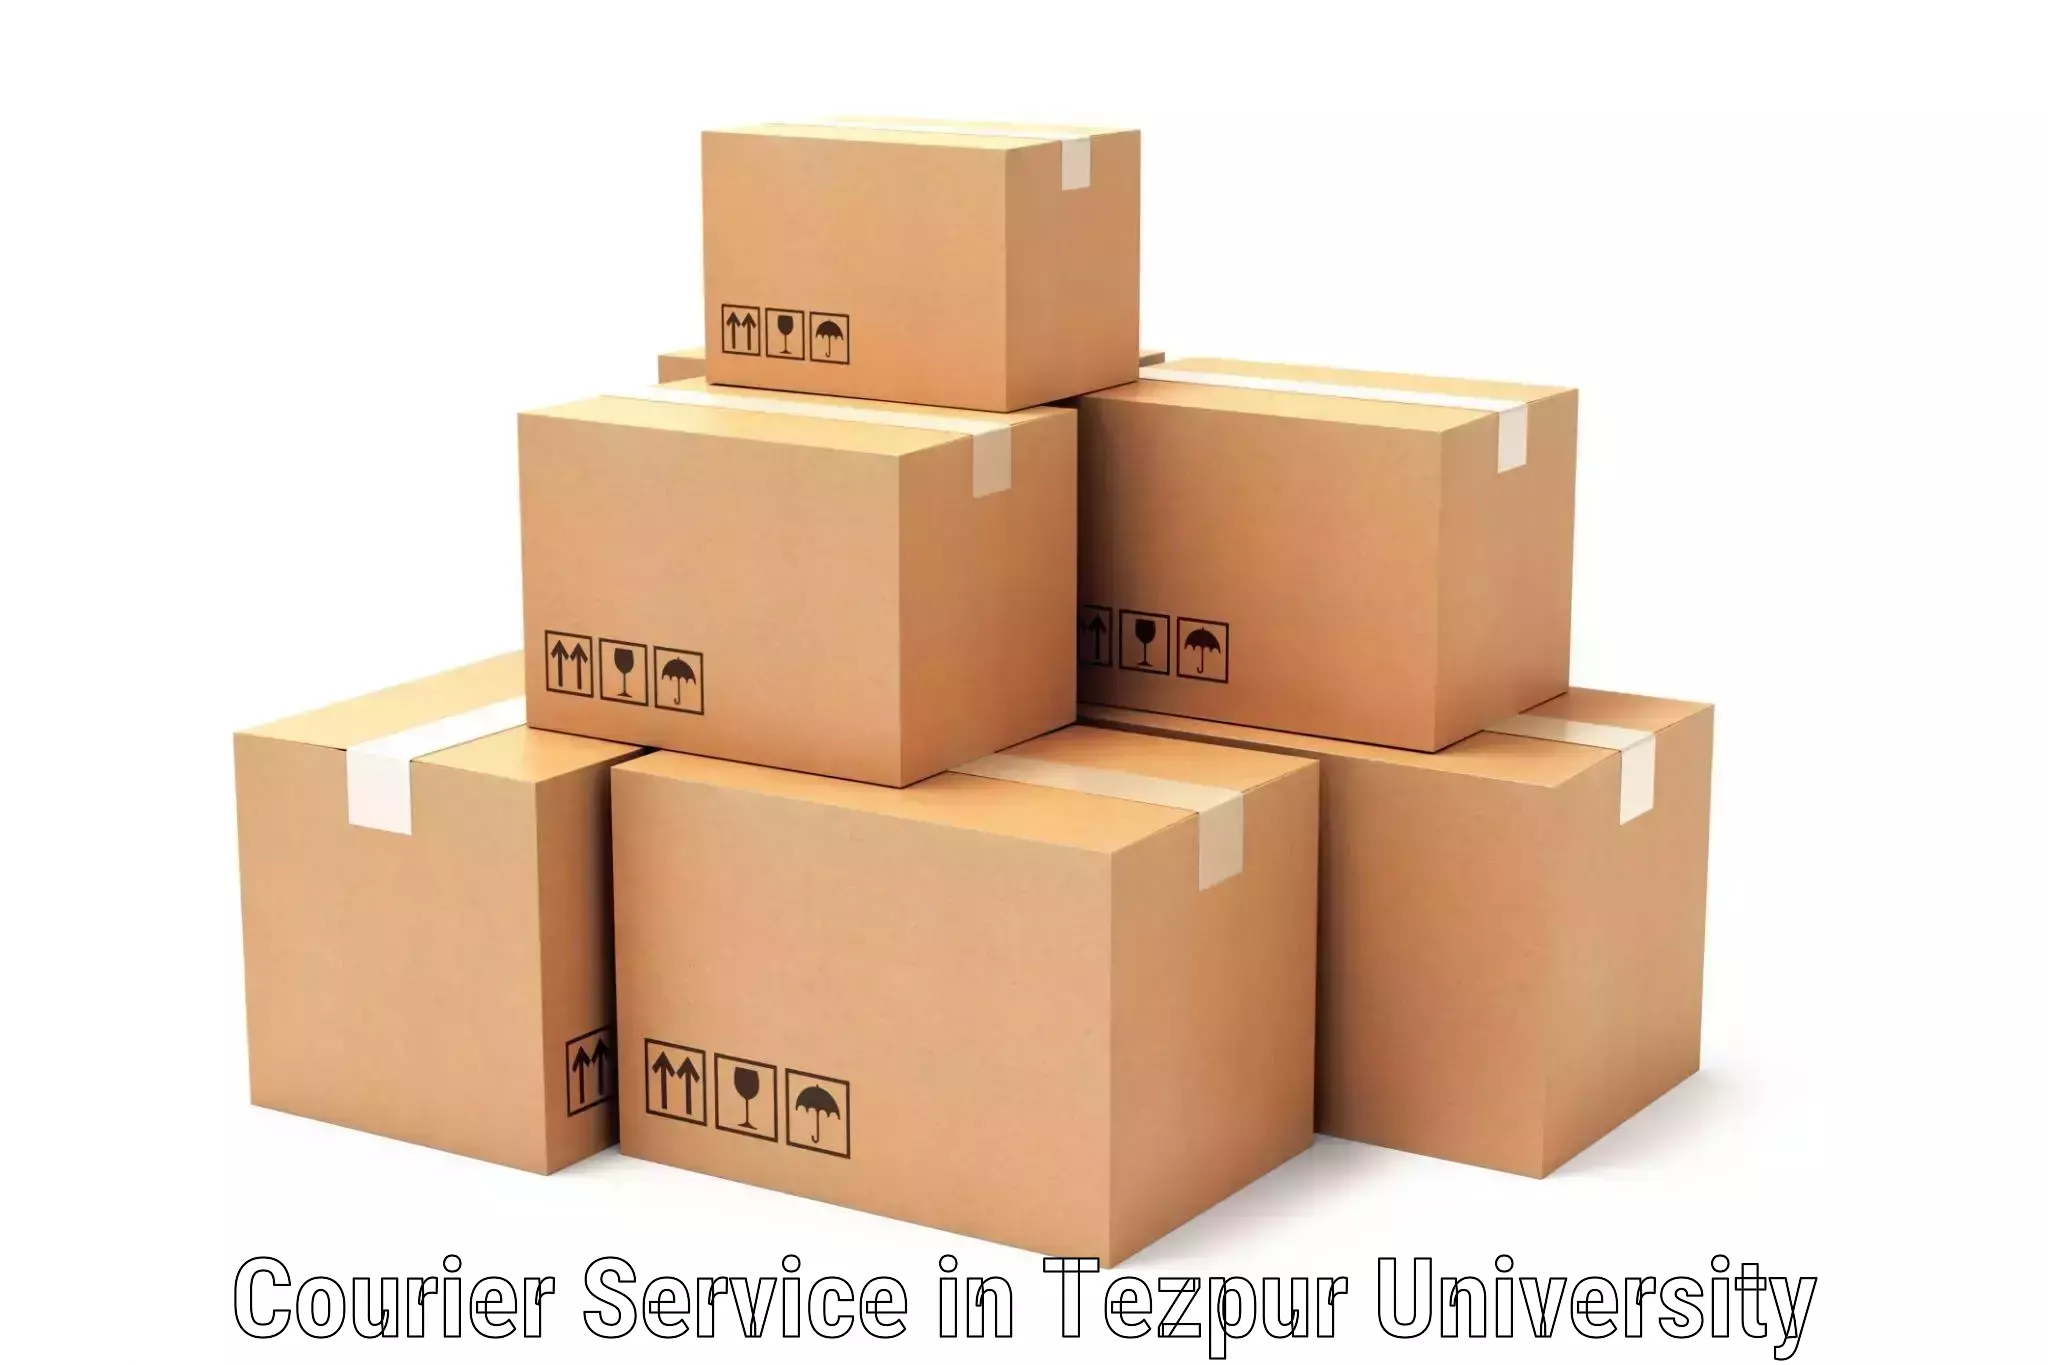 Efficient shipping operations in Tezpur University